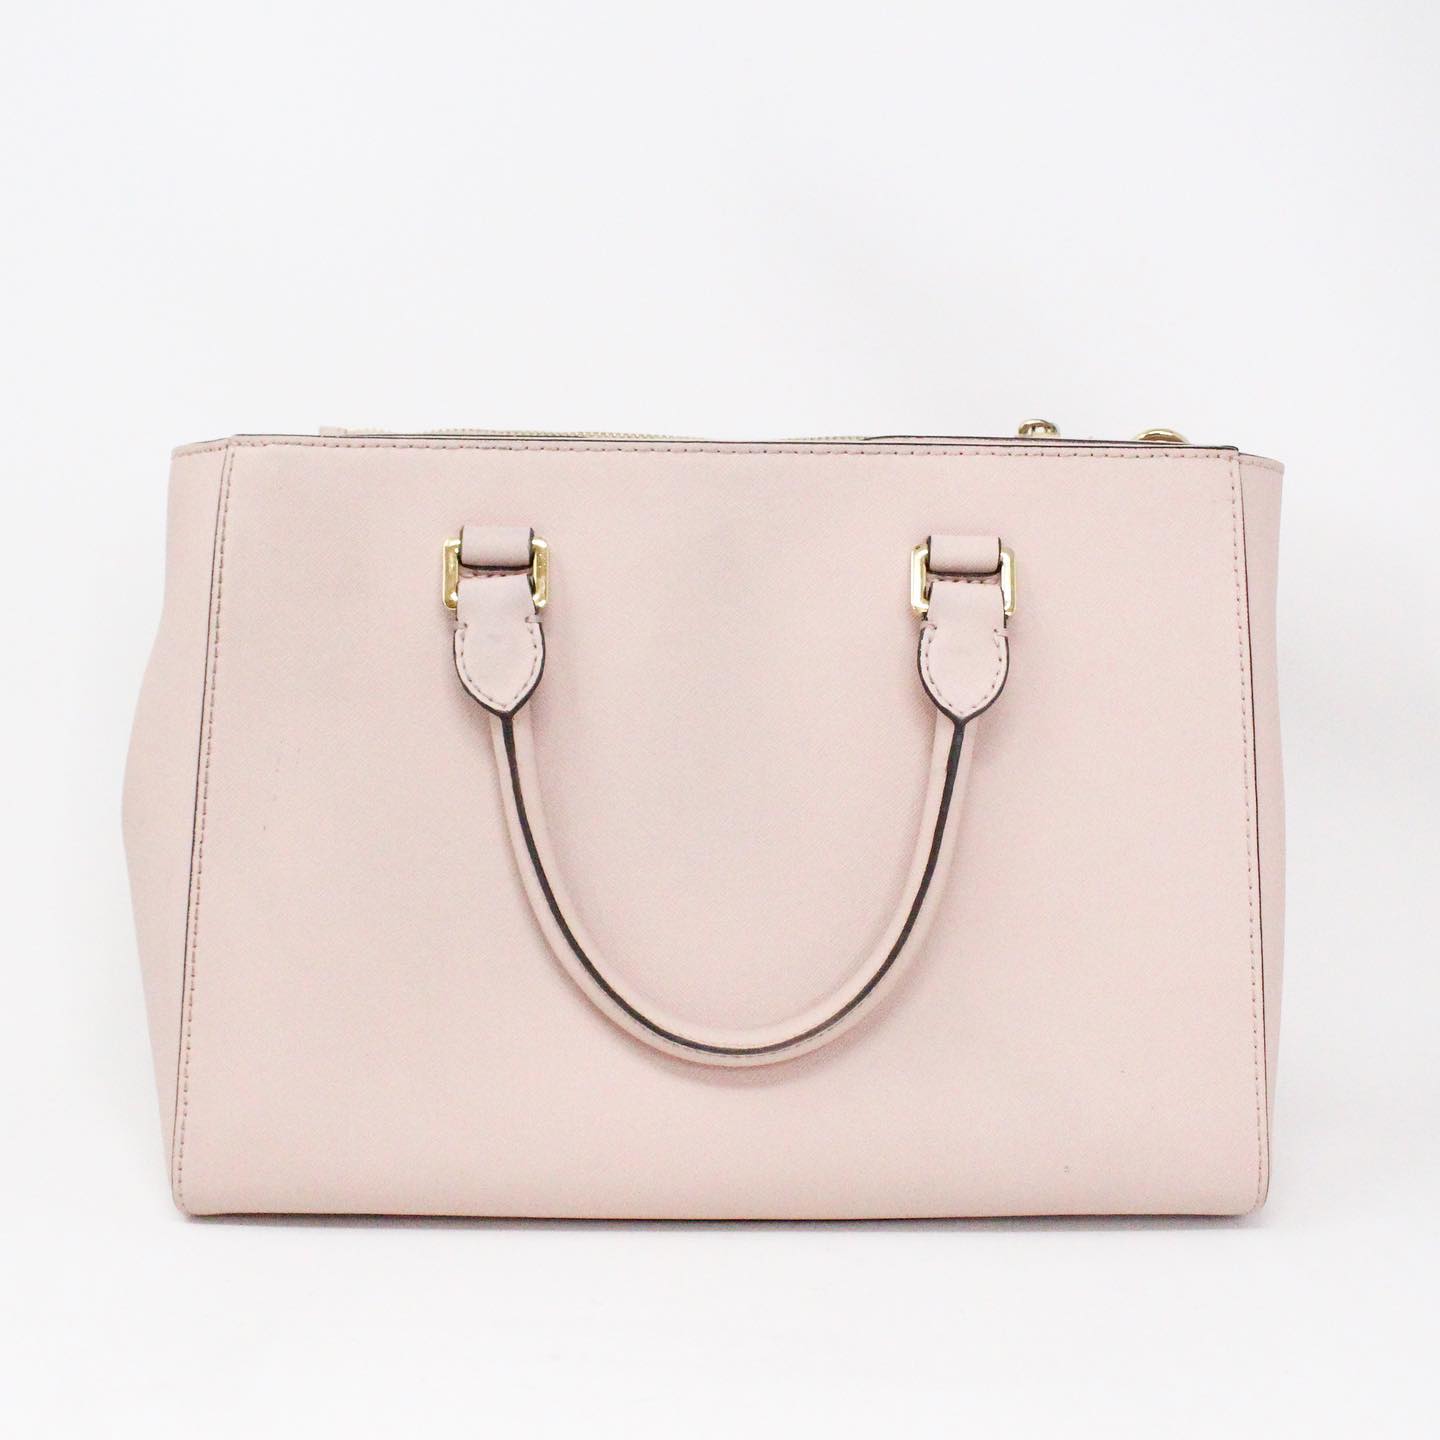 plafond IJver Arabisch ON SALE* MICHAEL KORS #36063 Blush Pink Saffiano Leather Handbag with Strap  – ALL YOUR BLISS